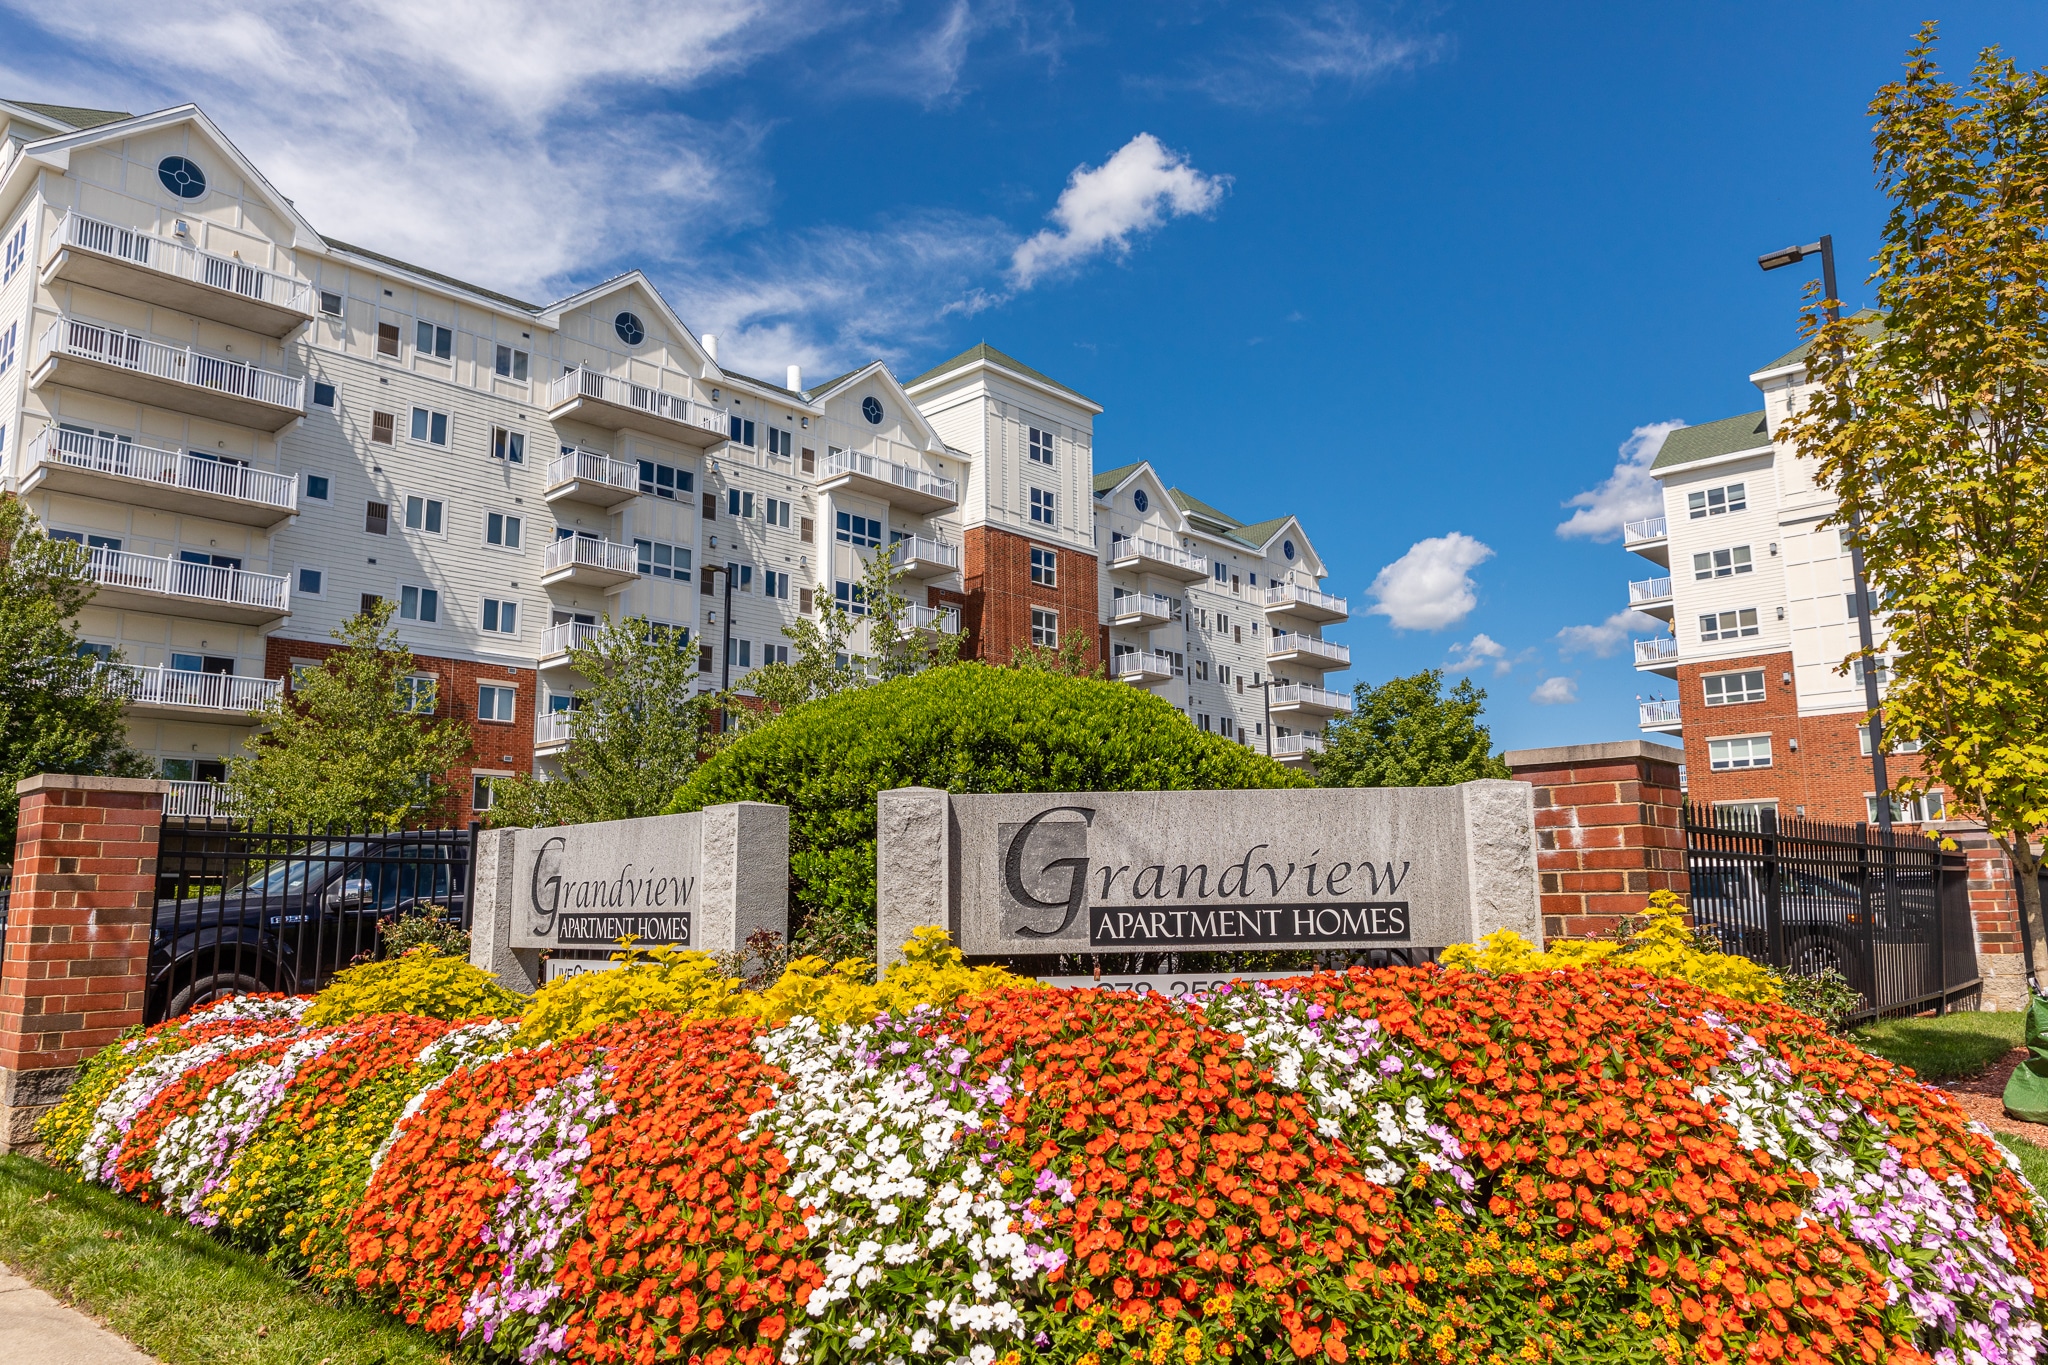 Beautiful Landscaping and Grandview Sign